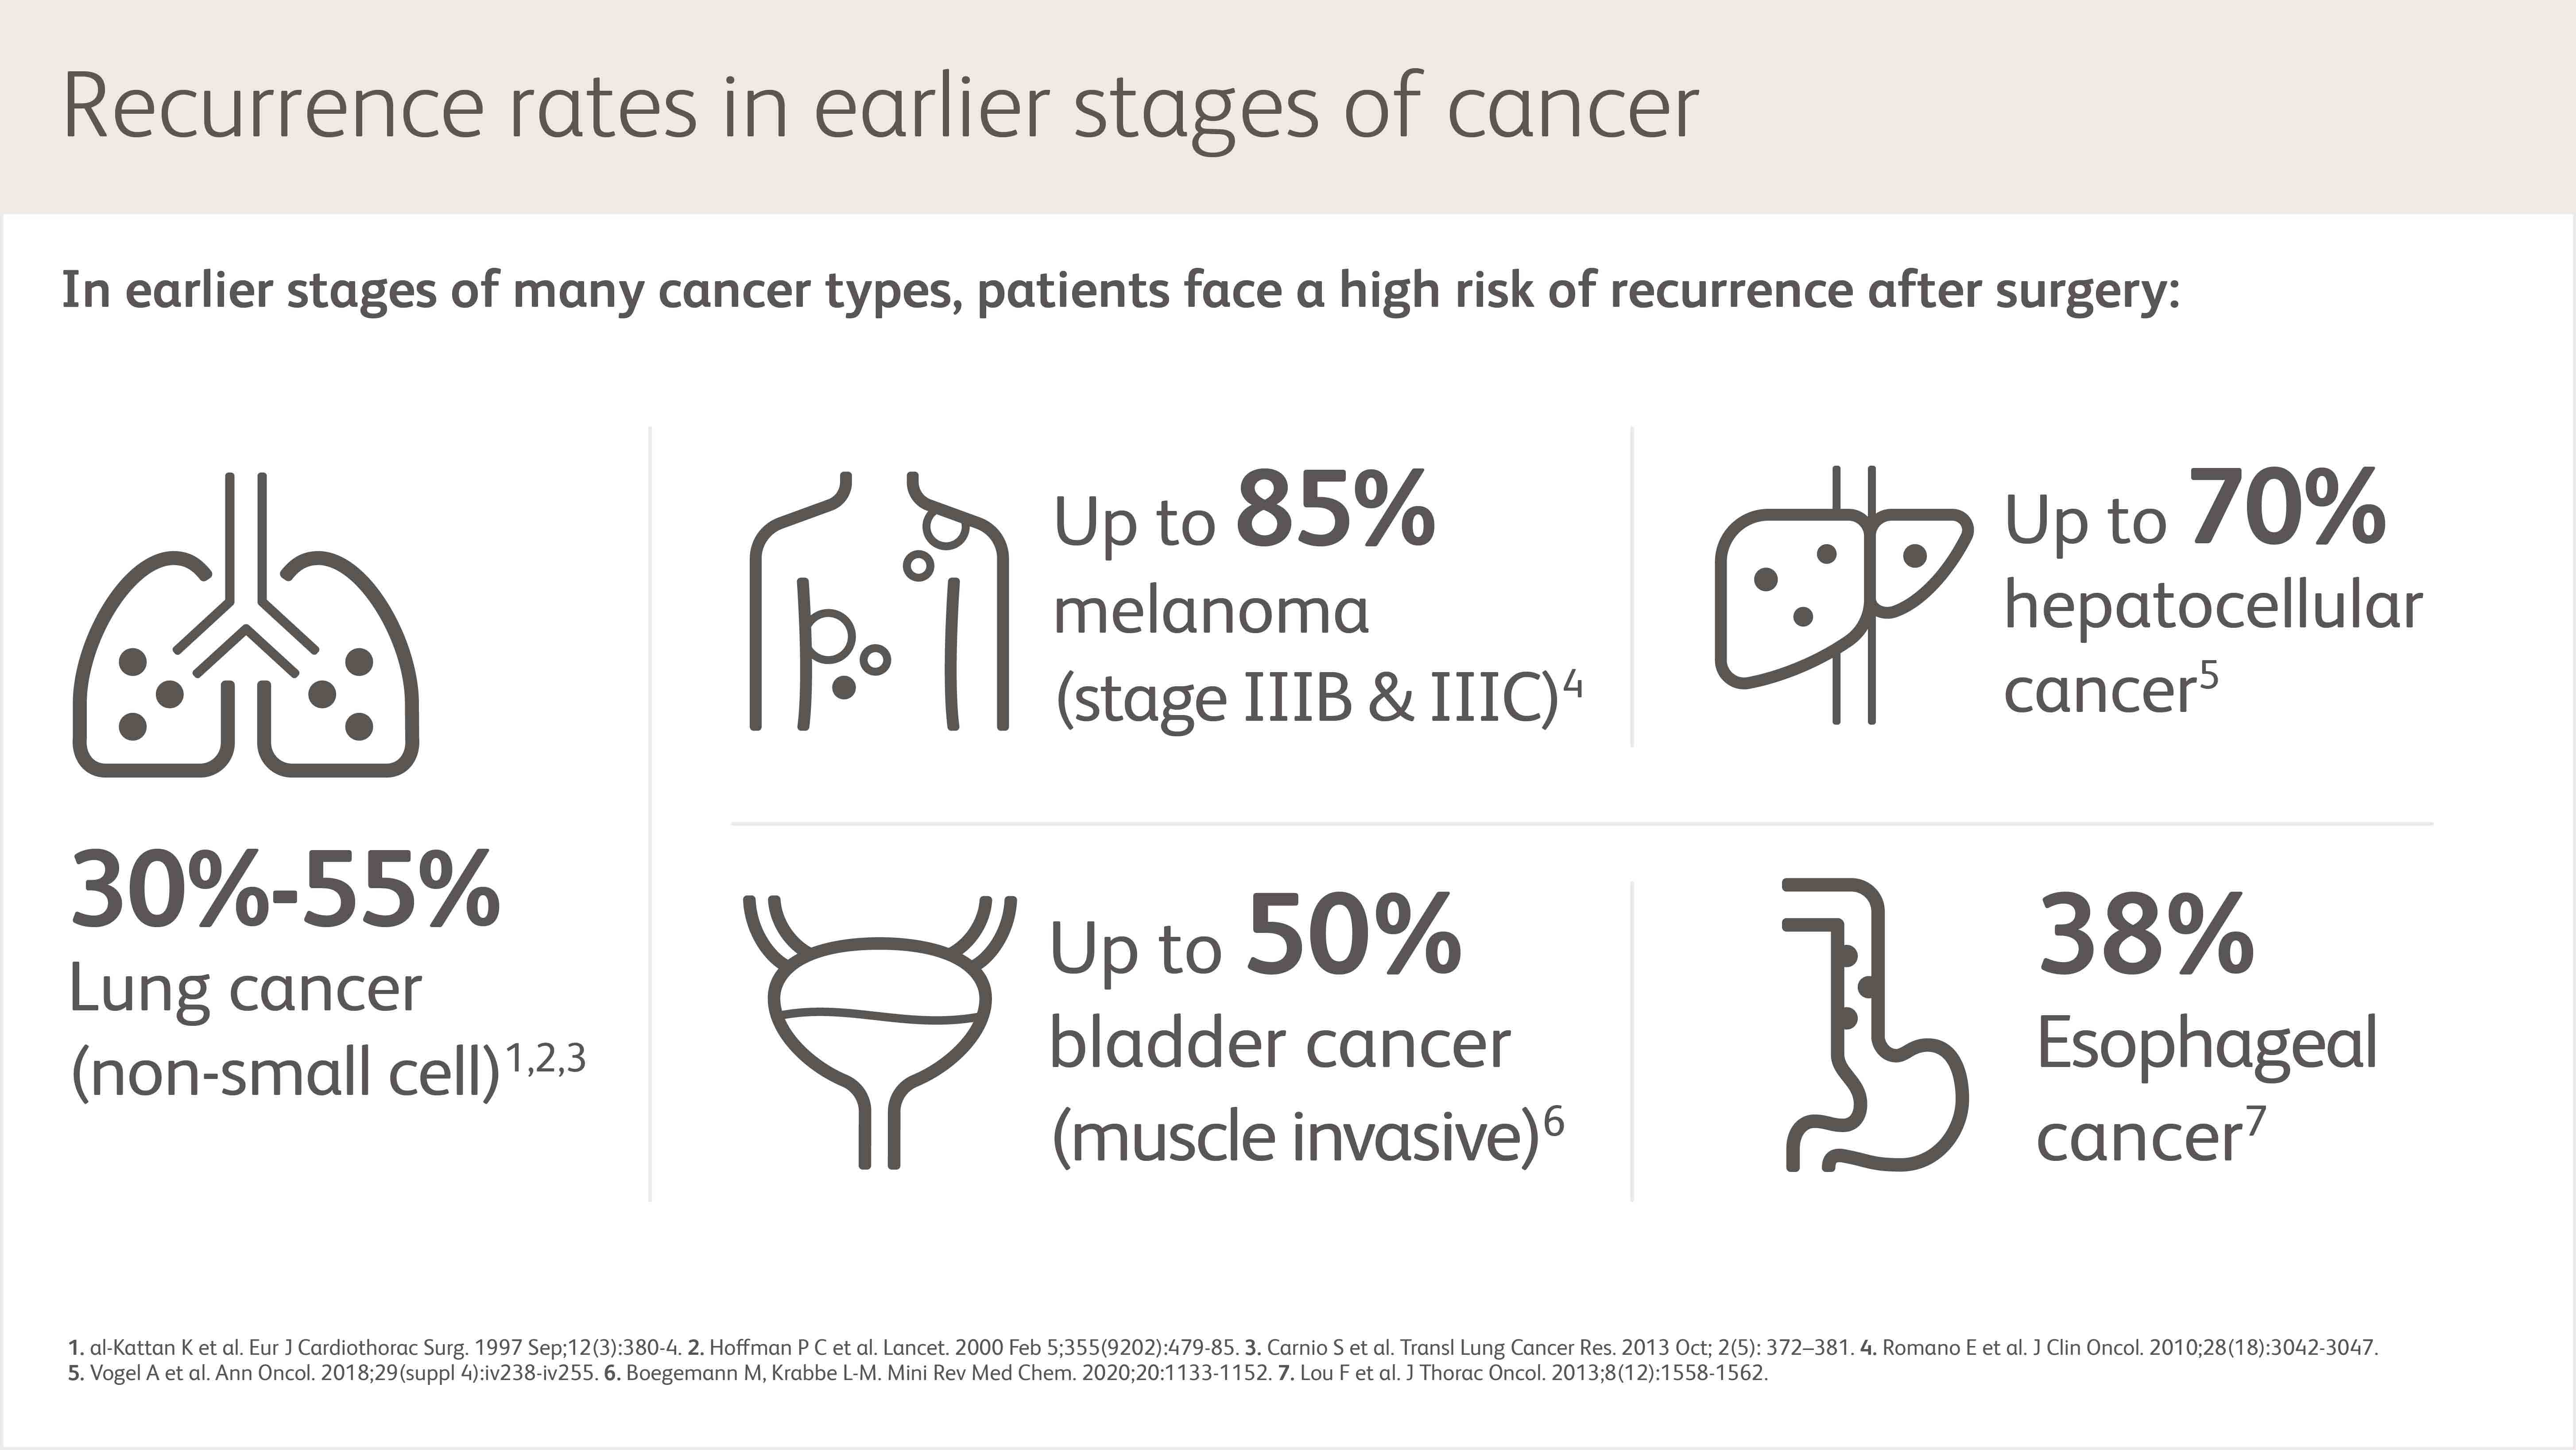 Recuurance rates in earlier stages of cancer